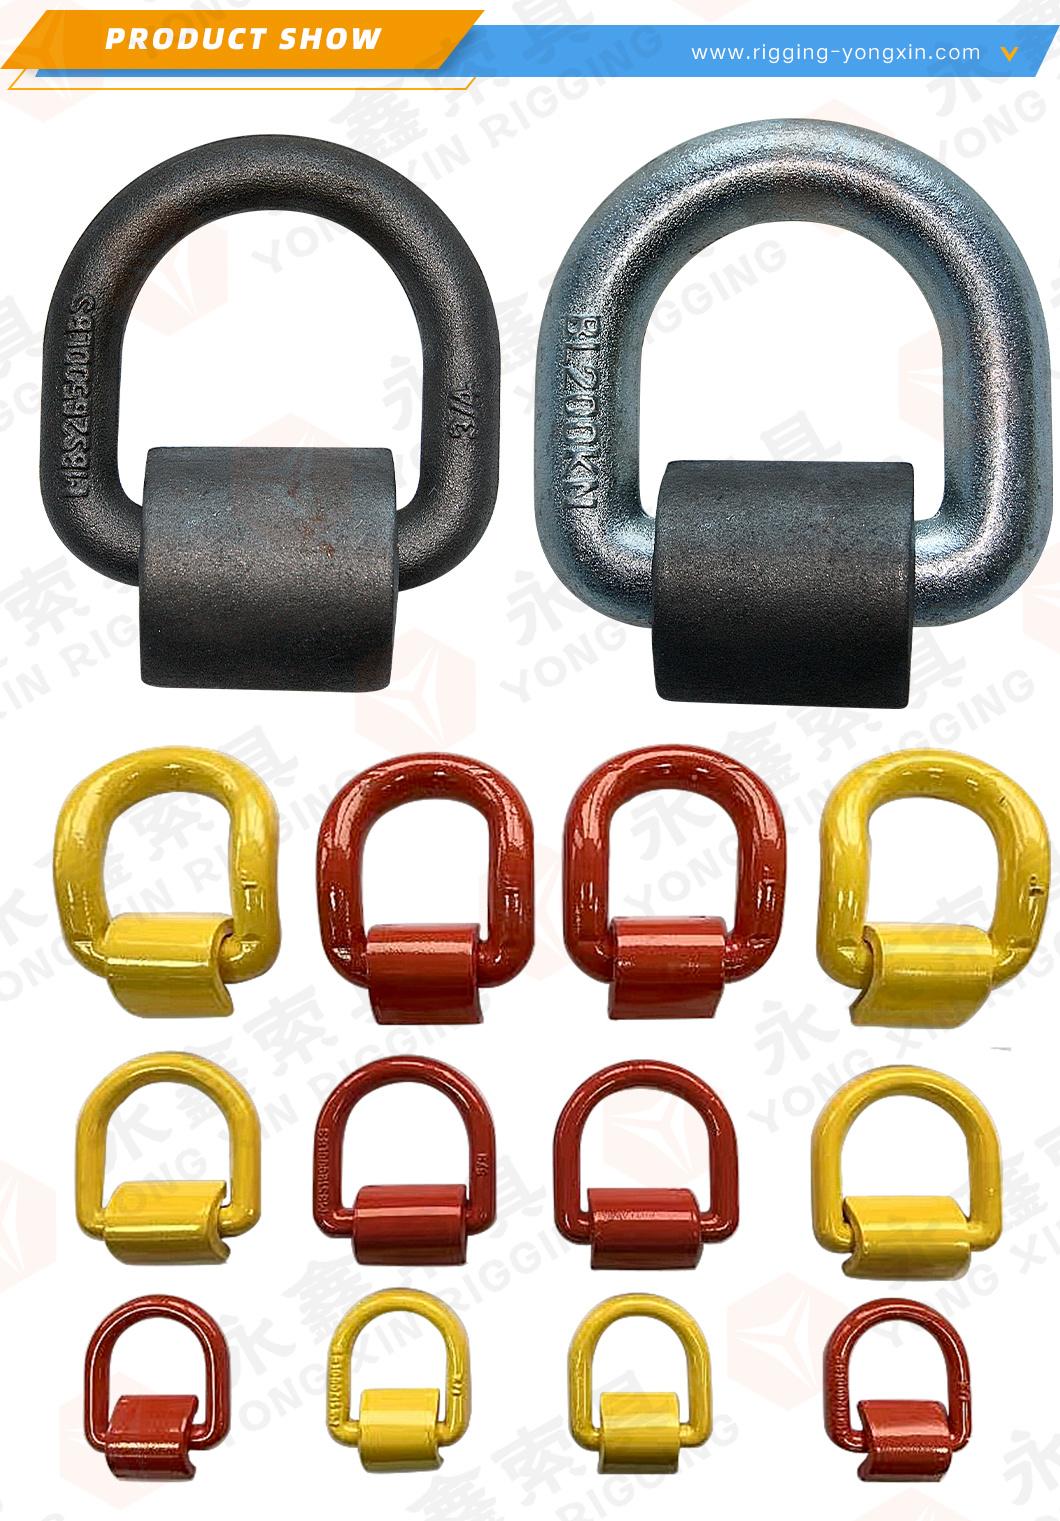 Lashing Ring High Quality 5/8" 18000lbs Forged D-Ring Assemblies and Weld-on Clips